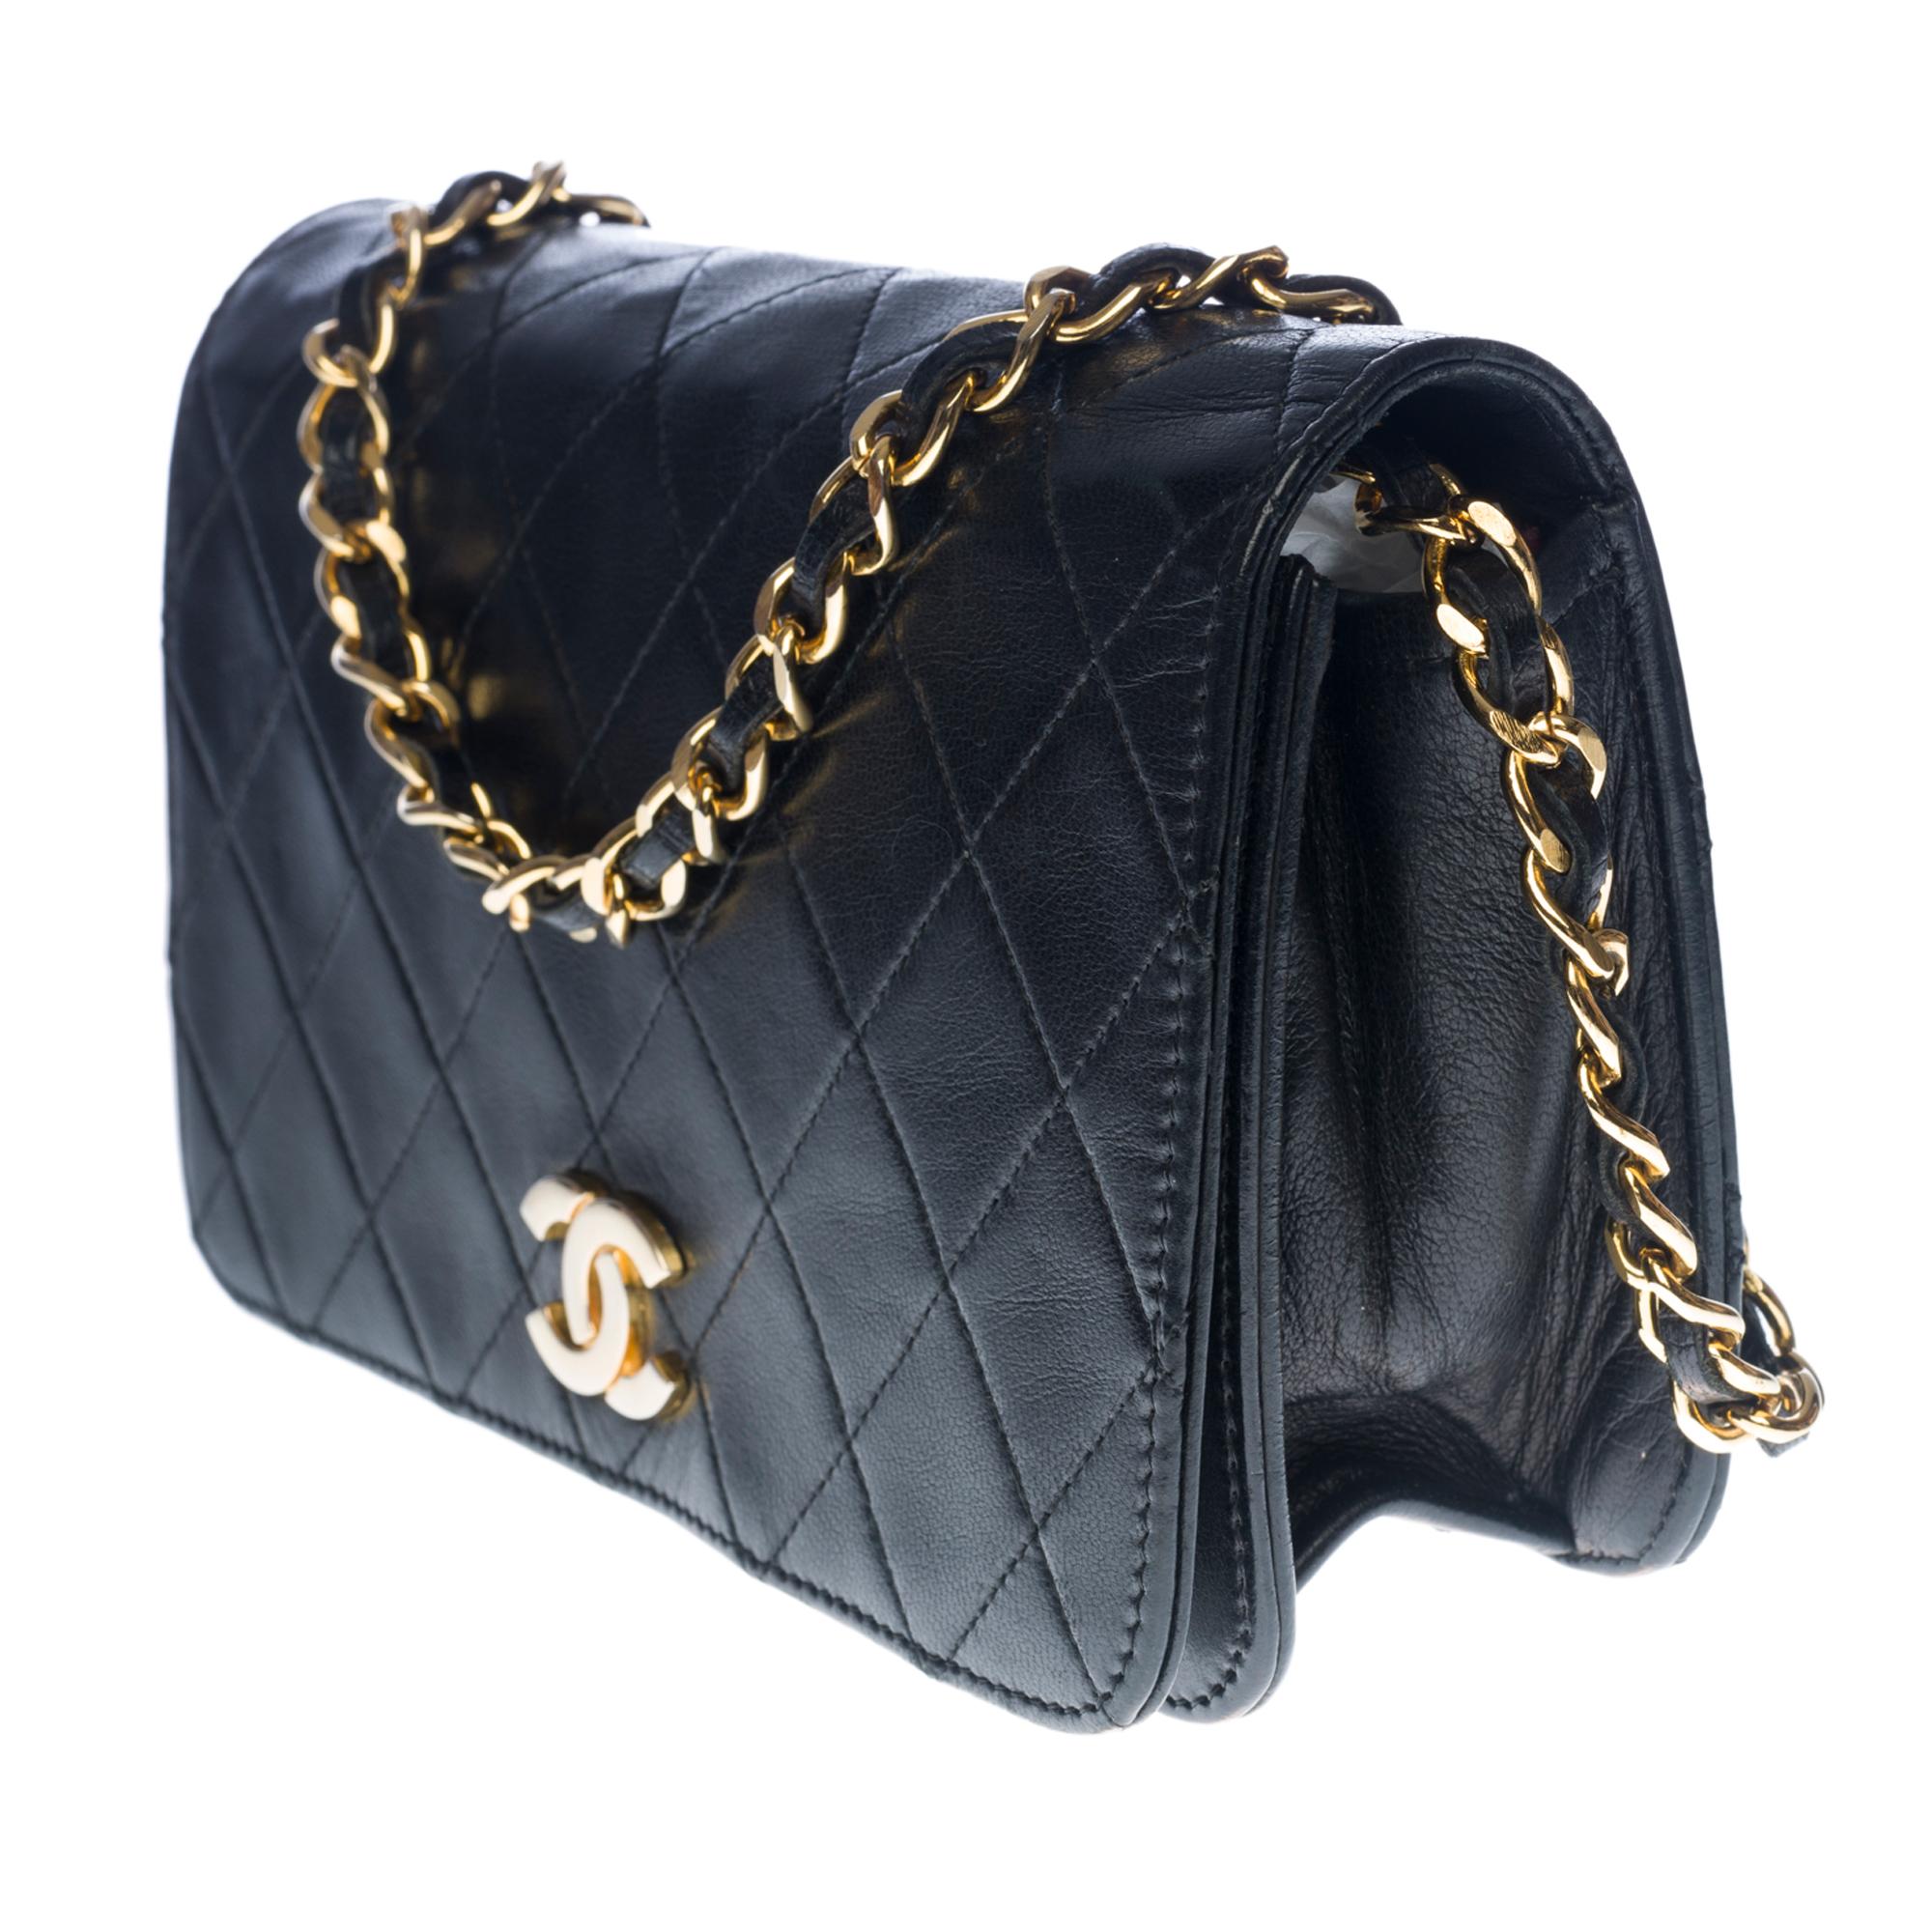 Black Chanel Classic Mini Full Flap shoulder bag in black quilted lambskin leather, GHW